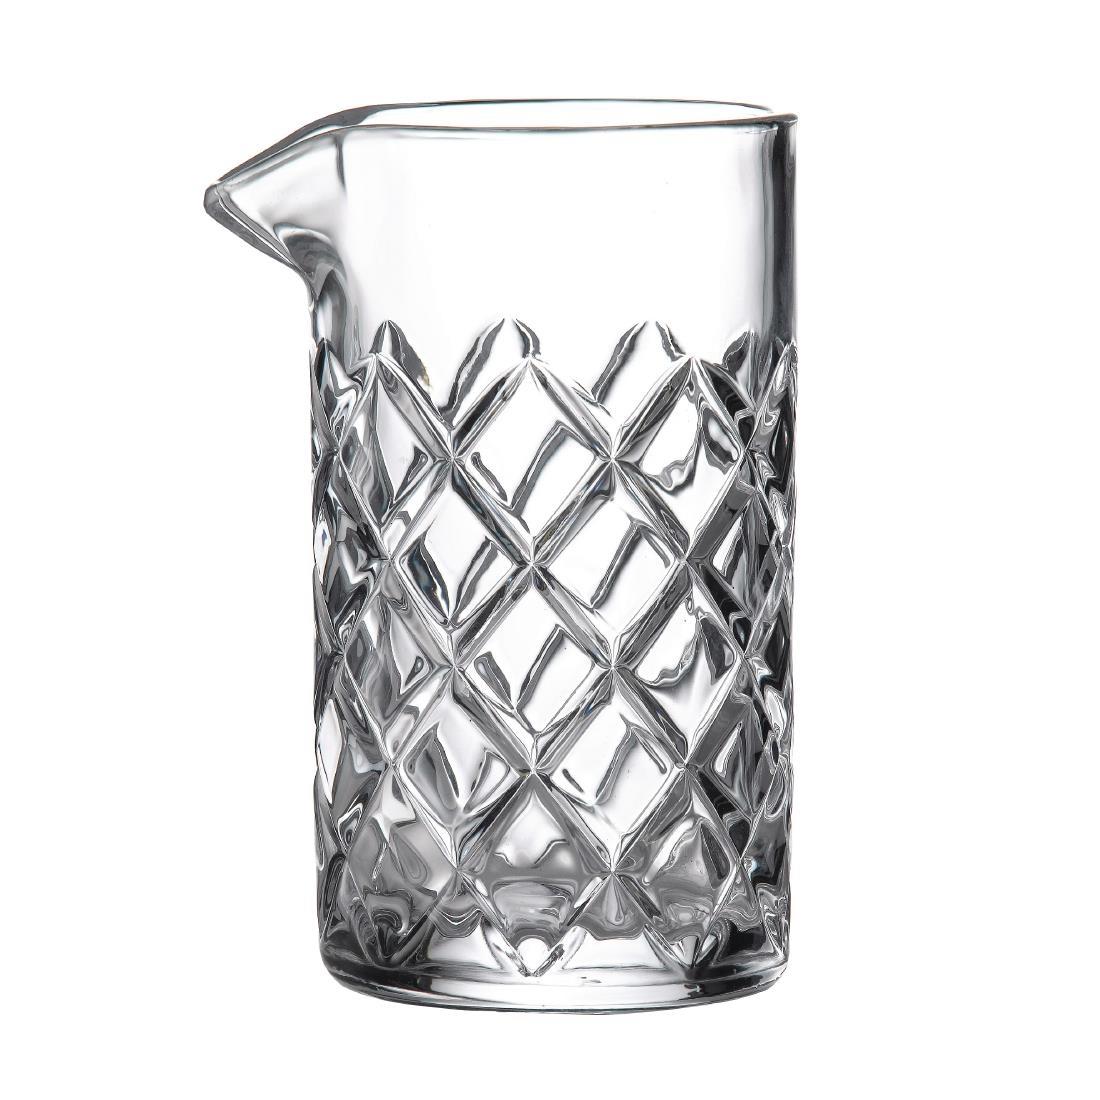 Cocktail mixing Glass 550ml - CK573  - 1